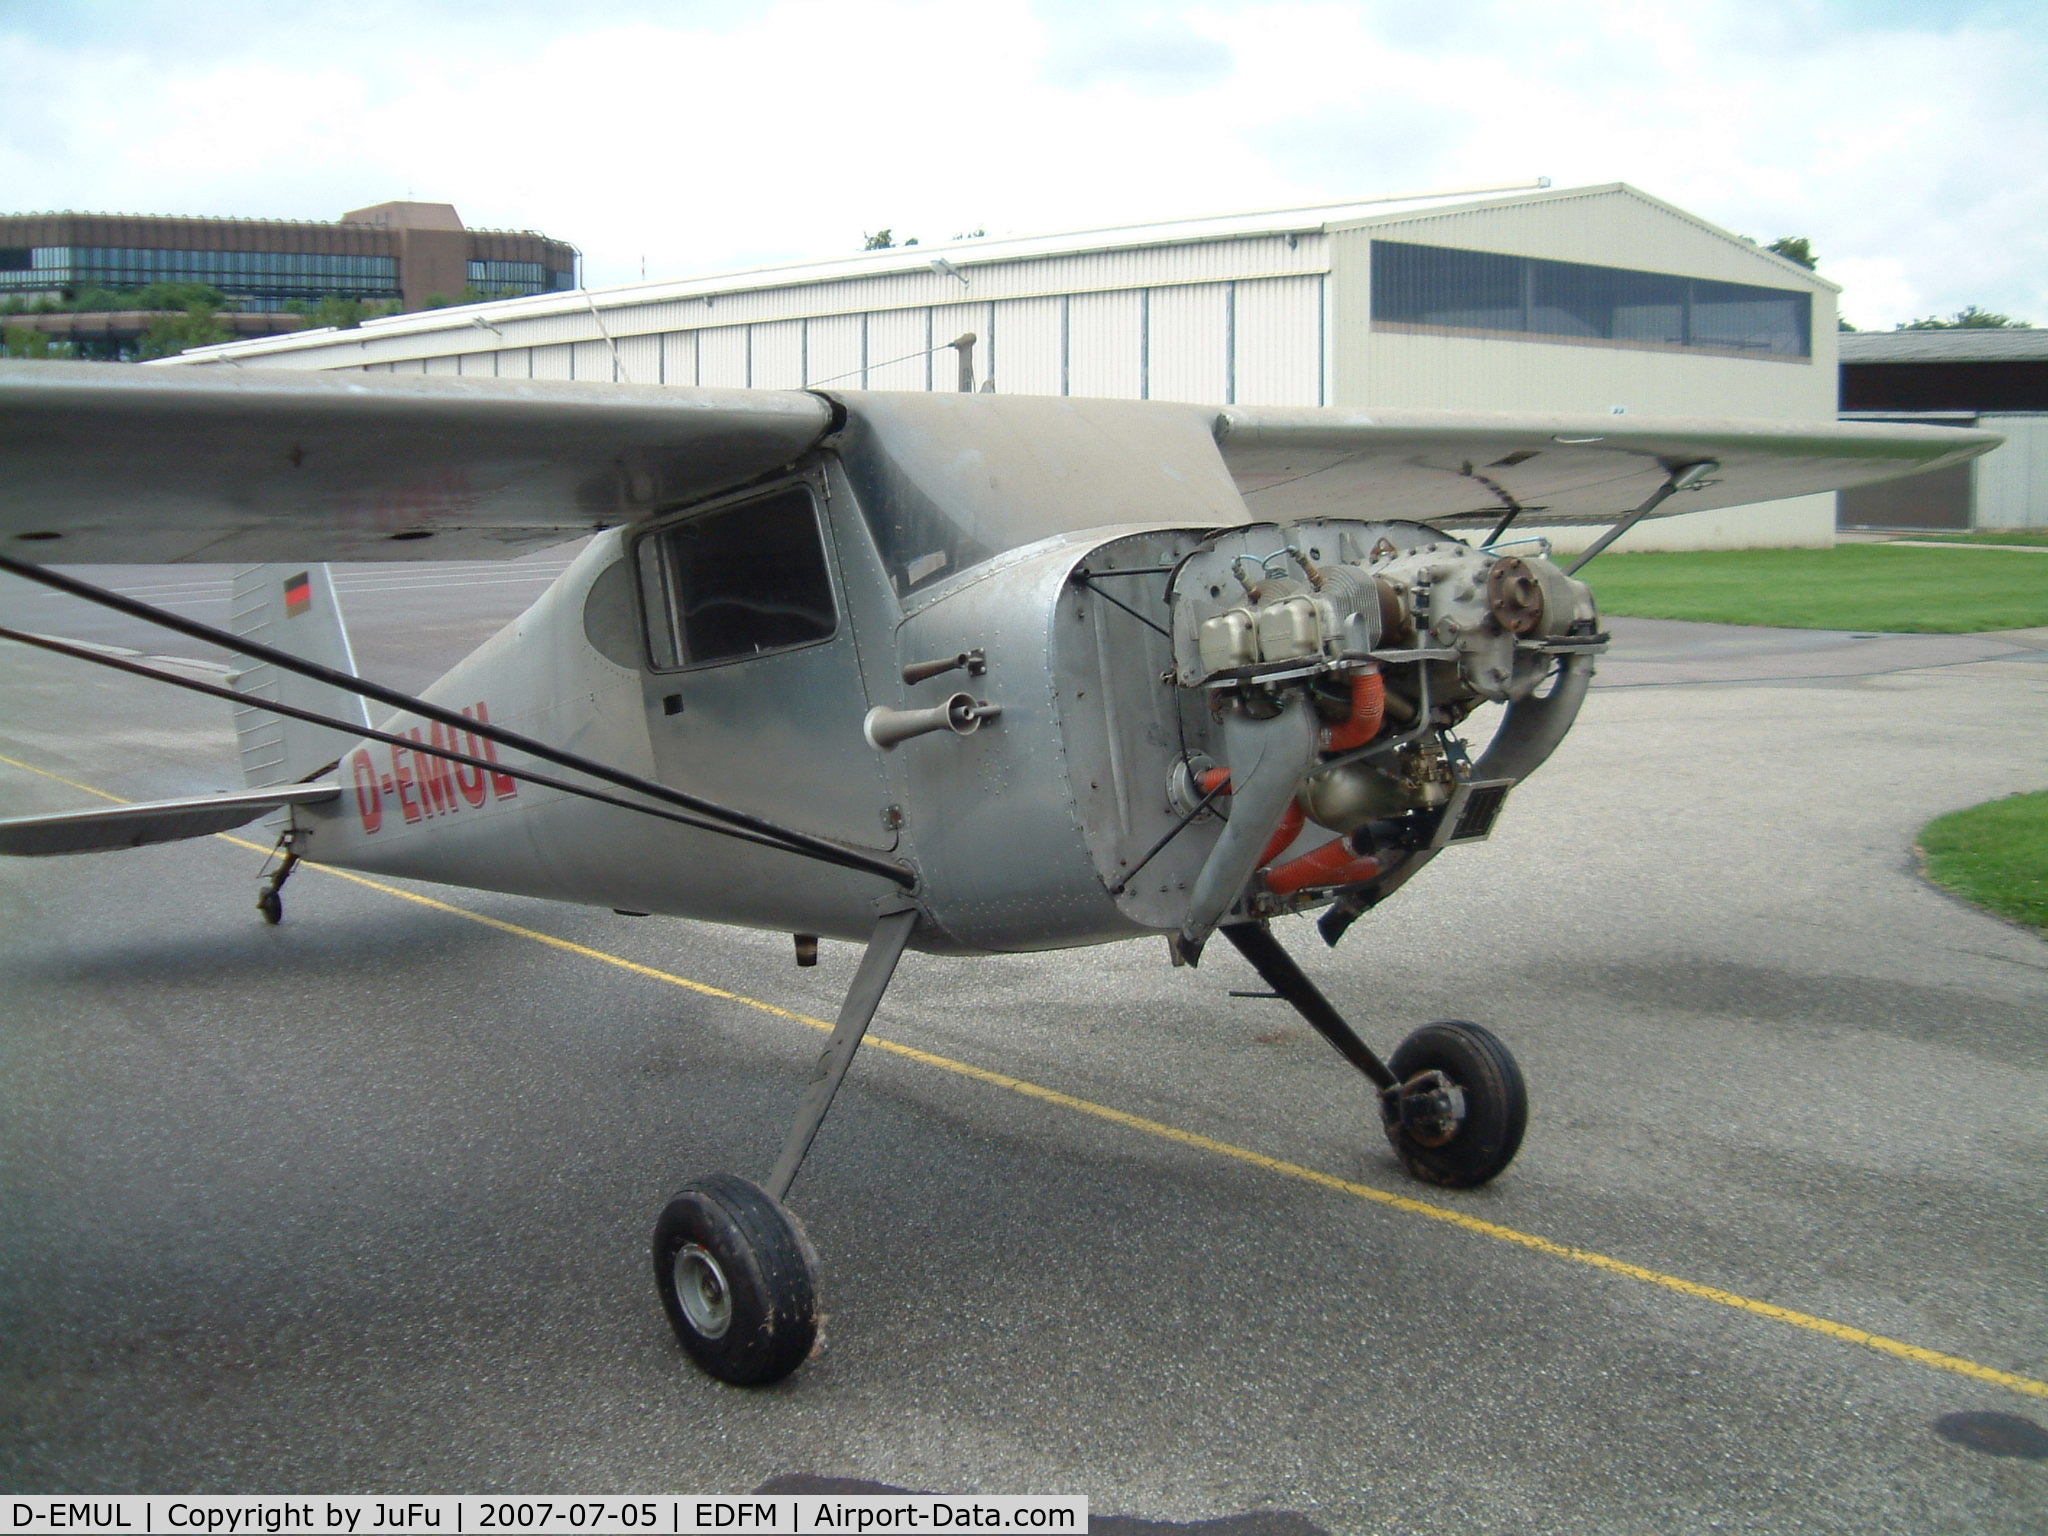 D-EMUL, 1946 Cessna 120 C/N 11226, D-EMUL, not flying for 14 years! Check out at http://D-EMUL.de